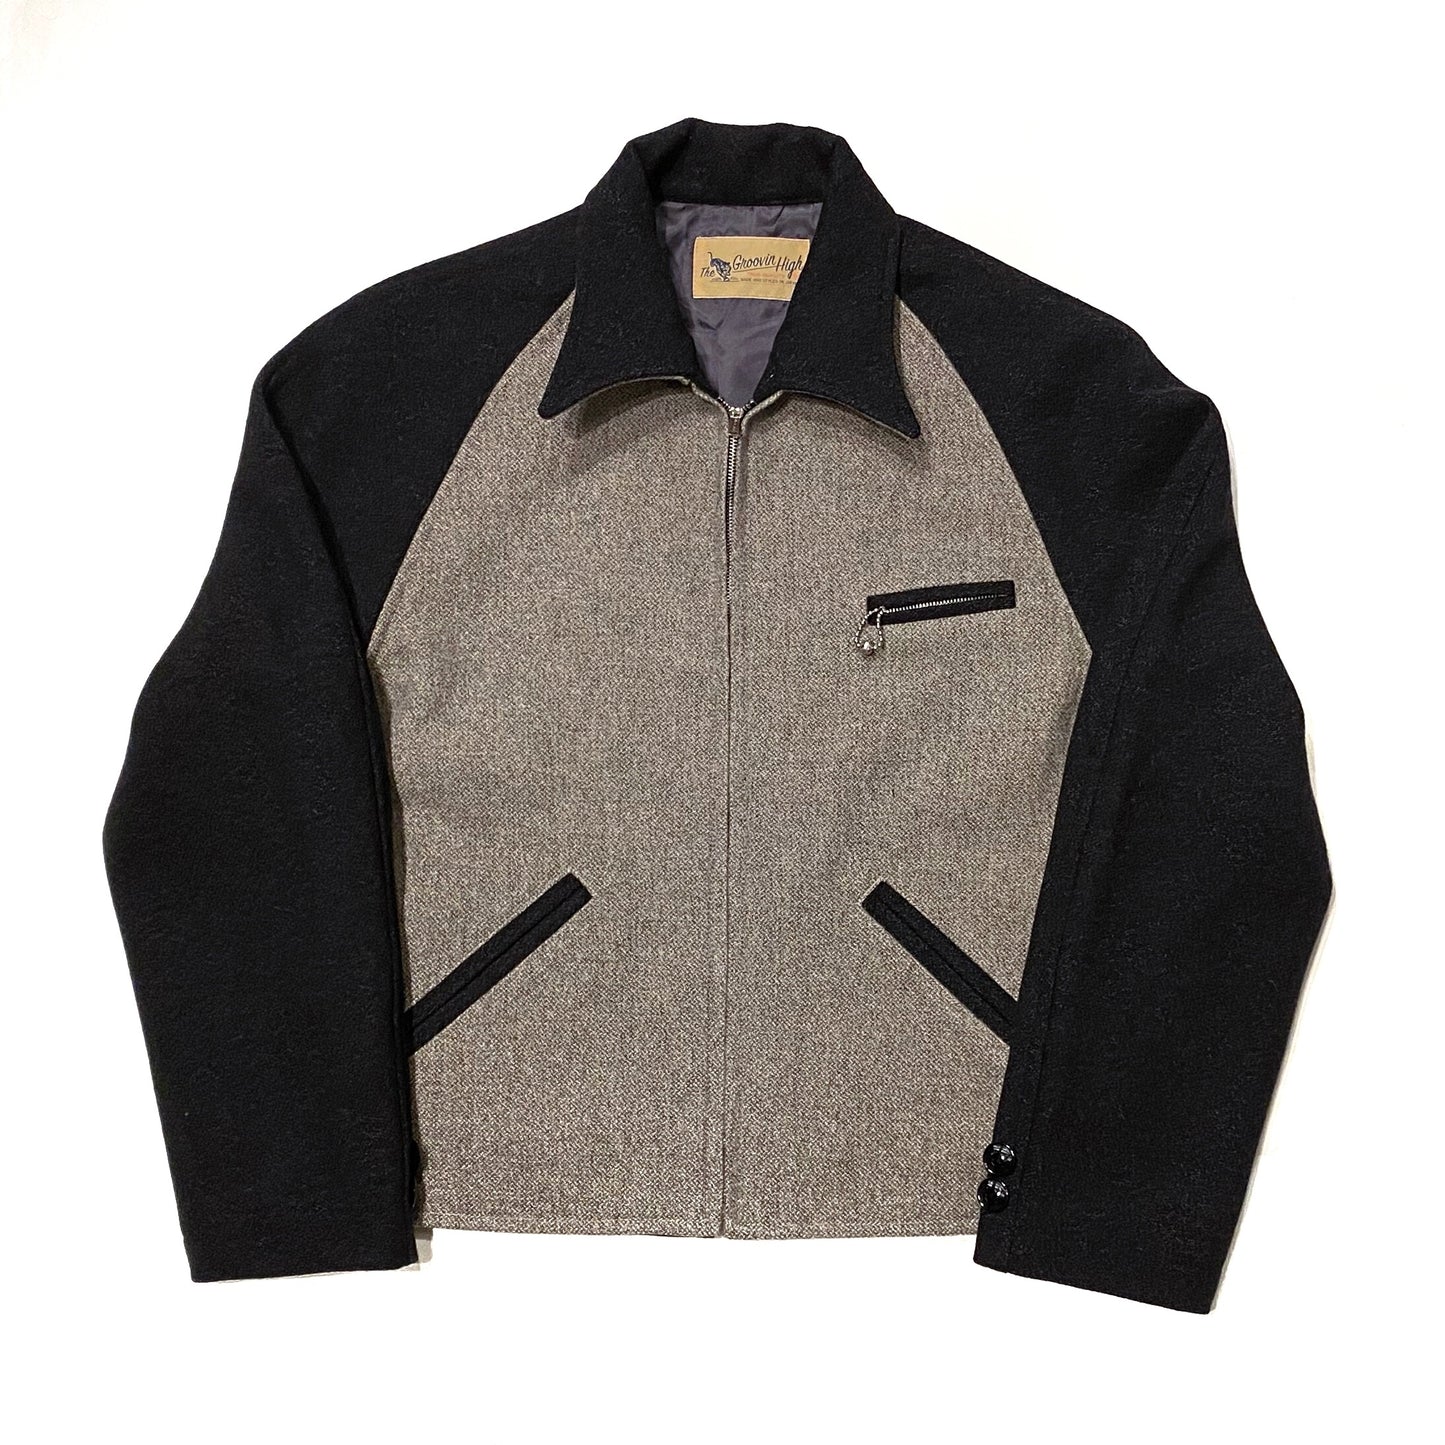 The Groovin High - Lot.503 Two-tone Wool Sports Jacket (Gray)